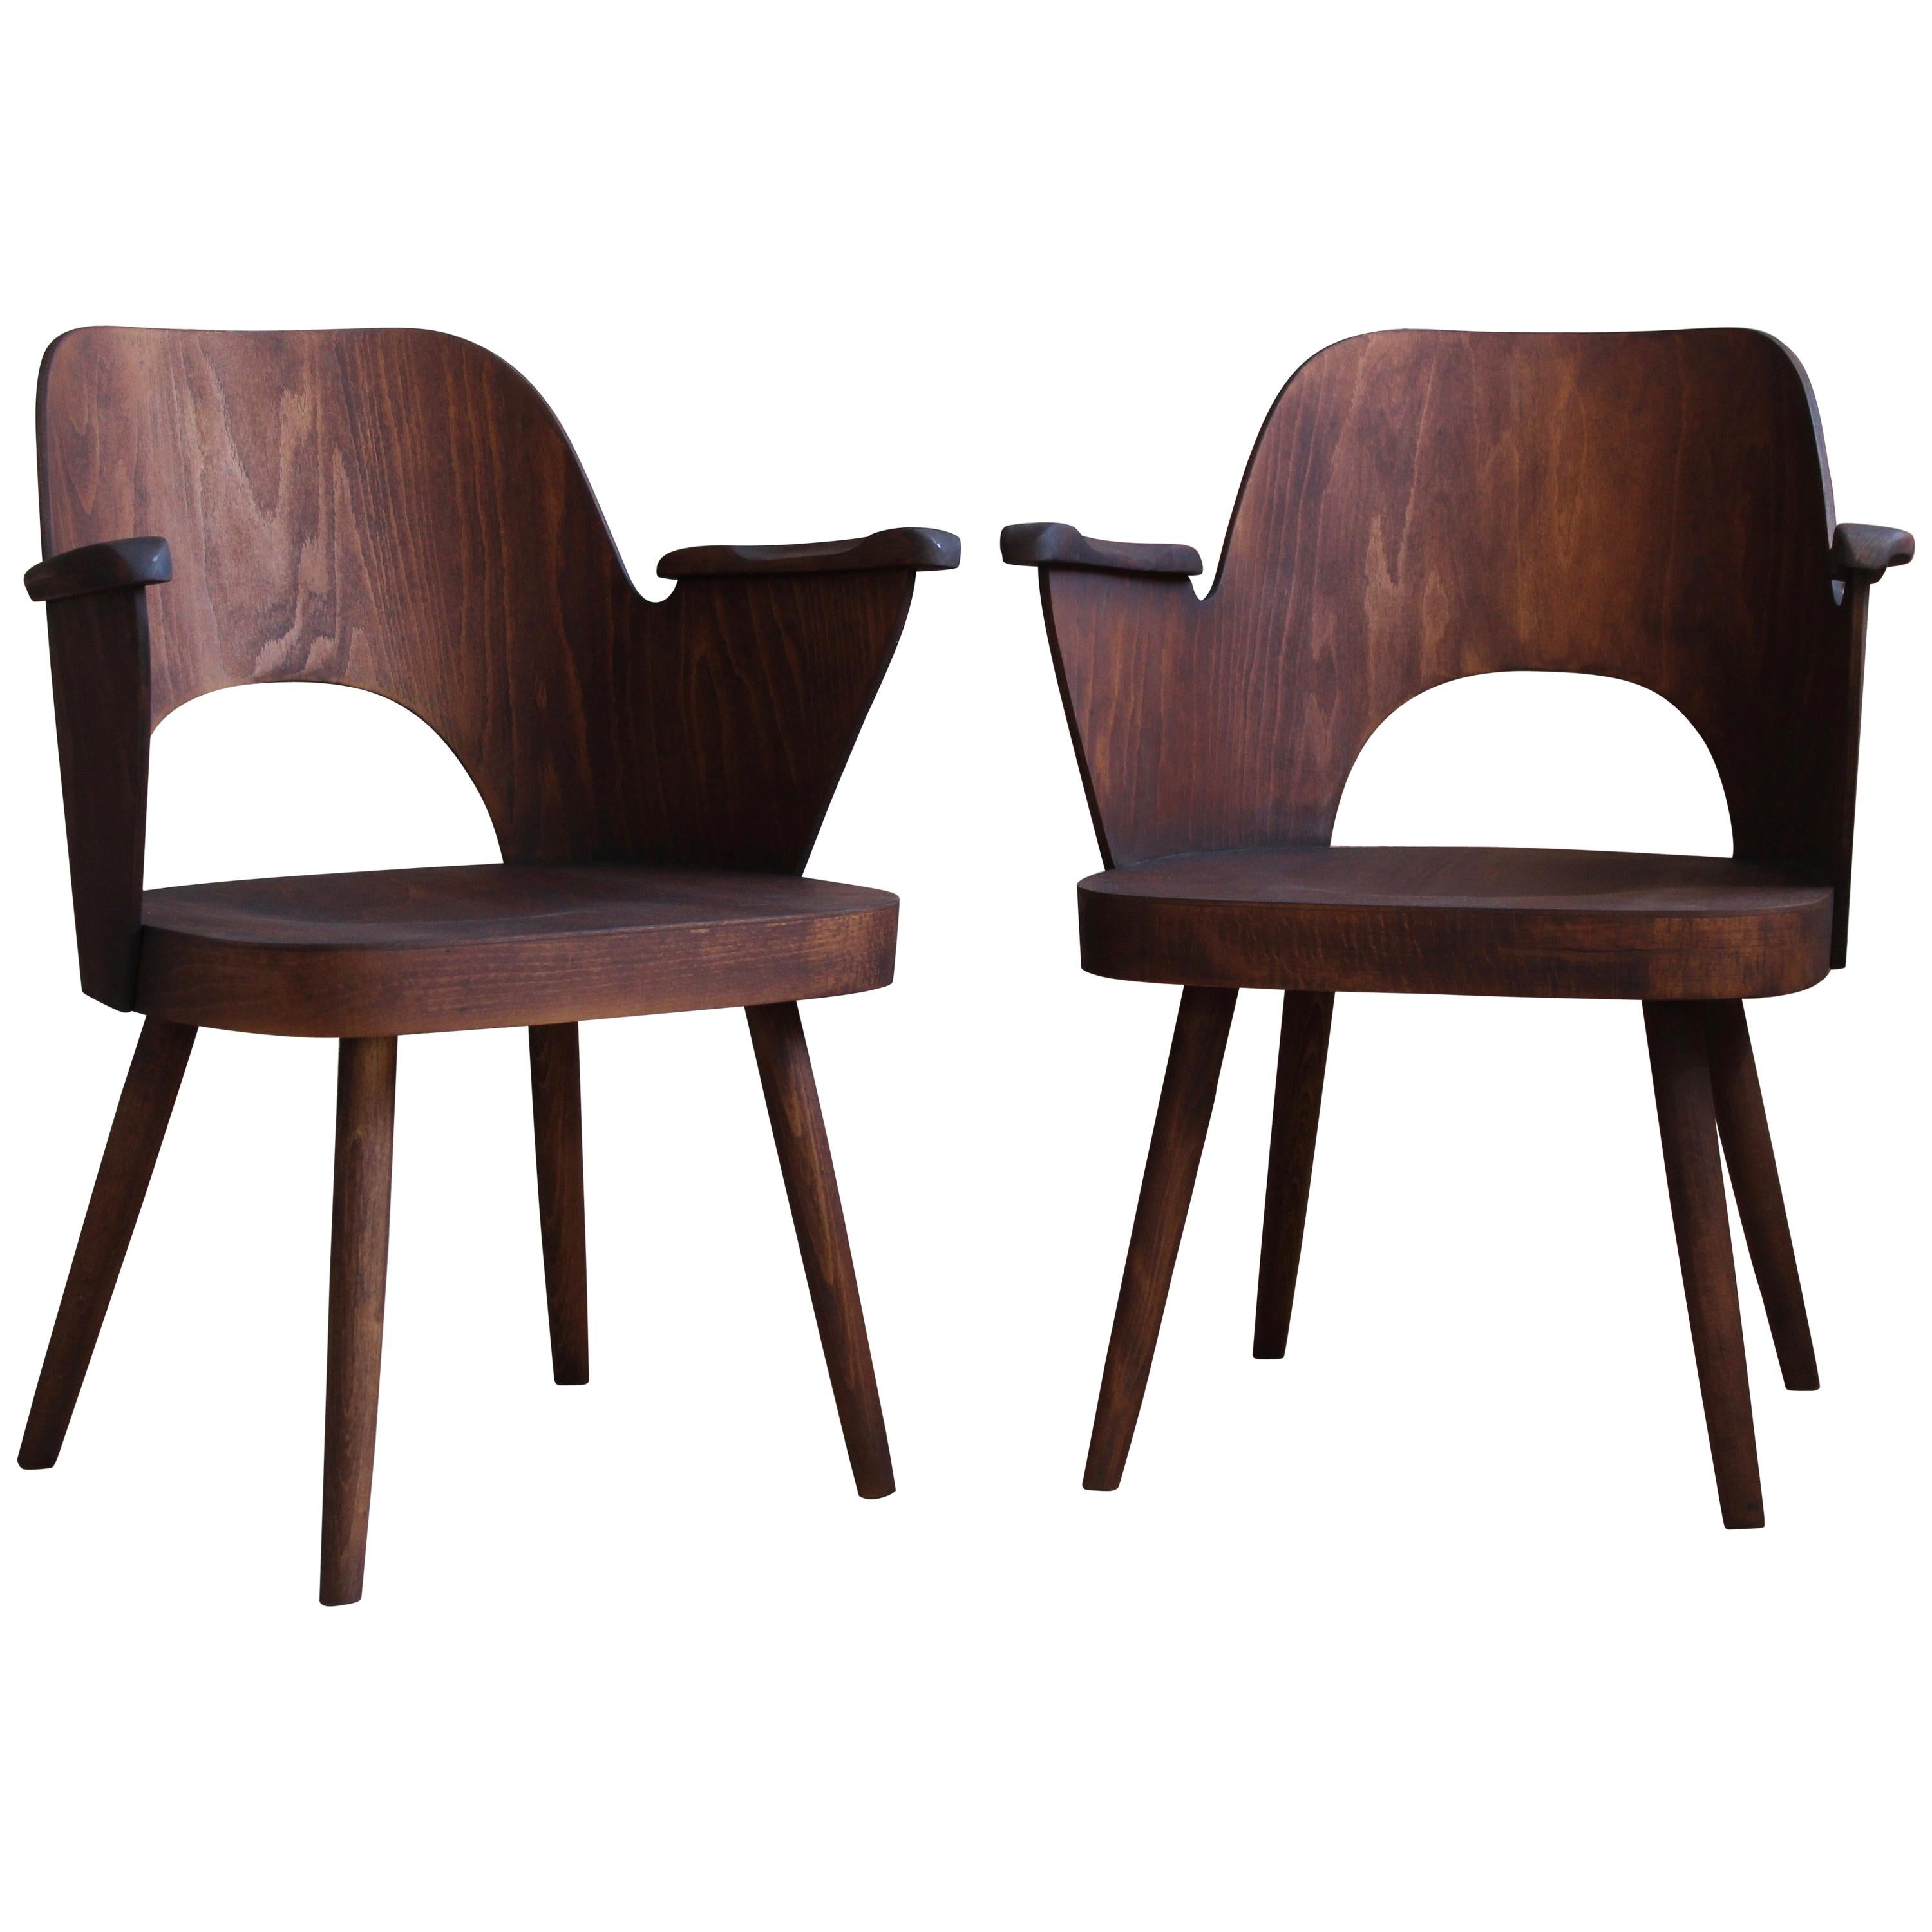 Lubomír Hofmann Chairs for TON, 1960s, Beechwood Finished in Oil, Midcentury